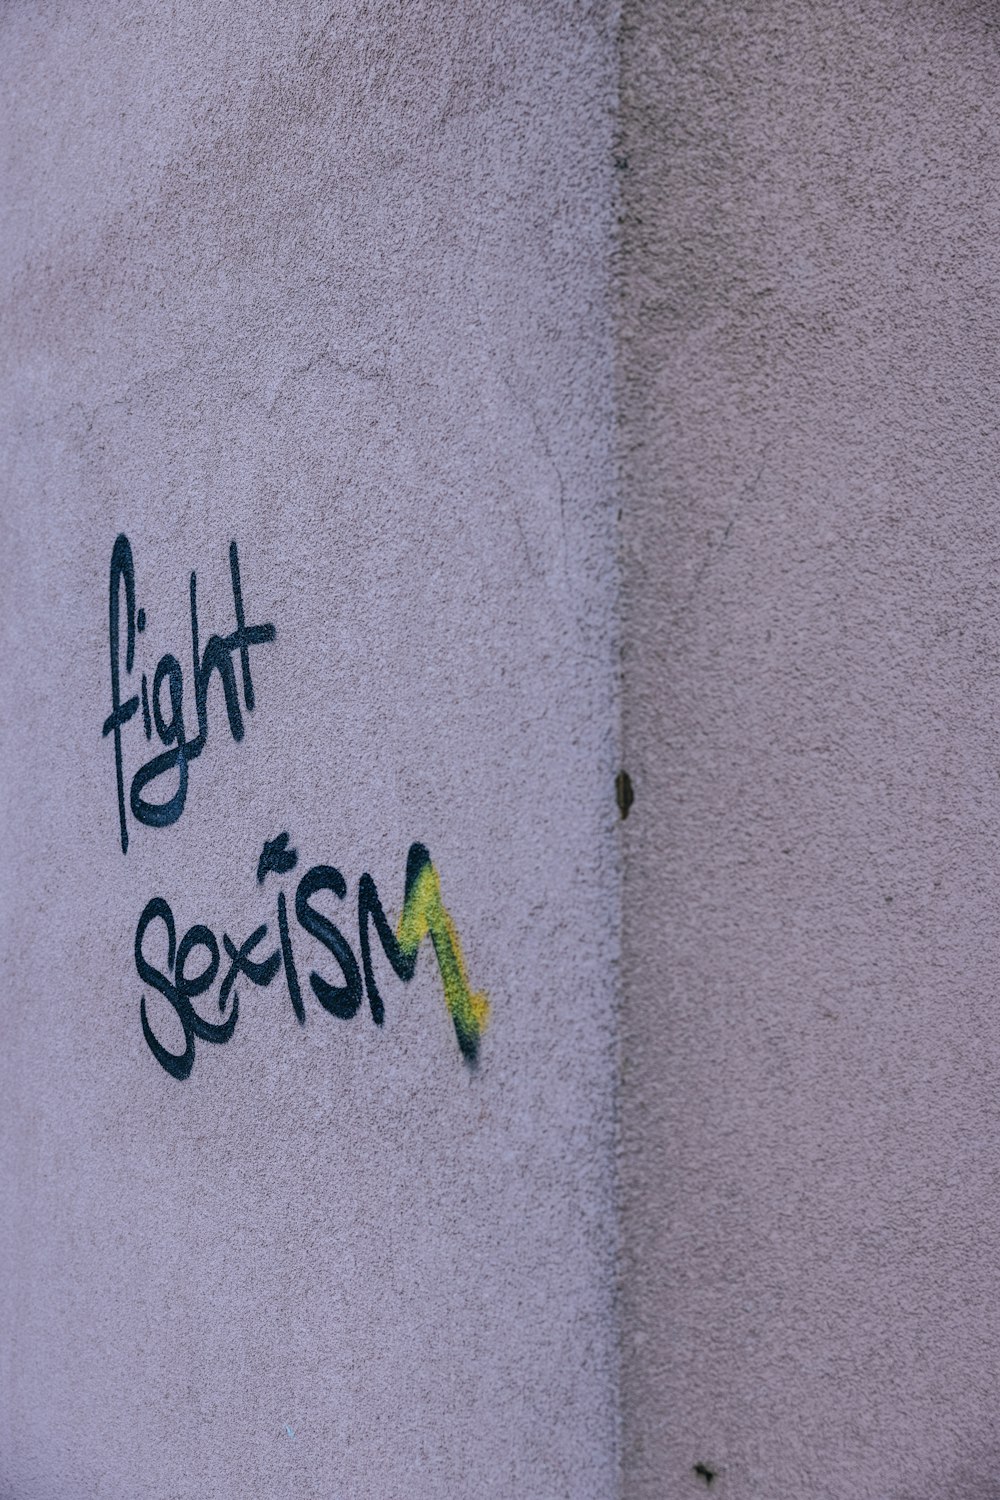 graffiti on the side of a building that says fight sexism